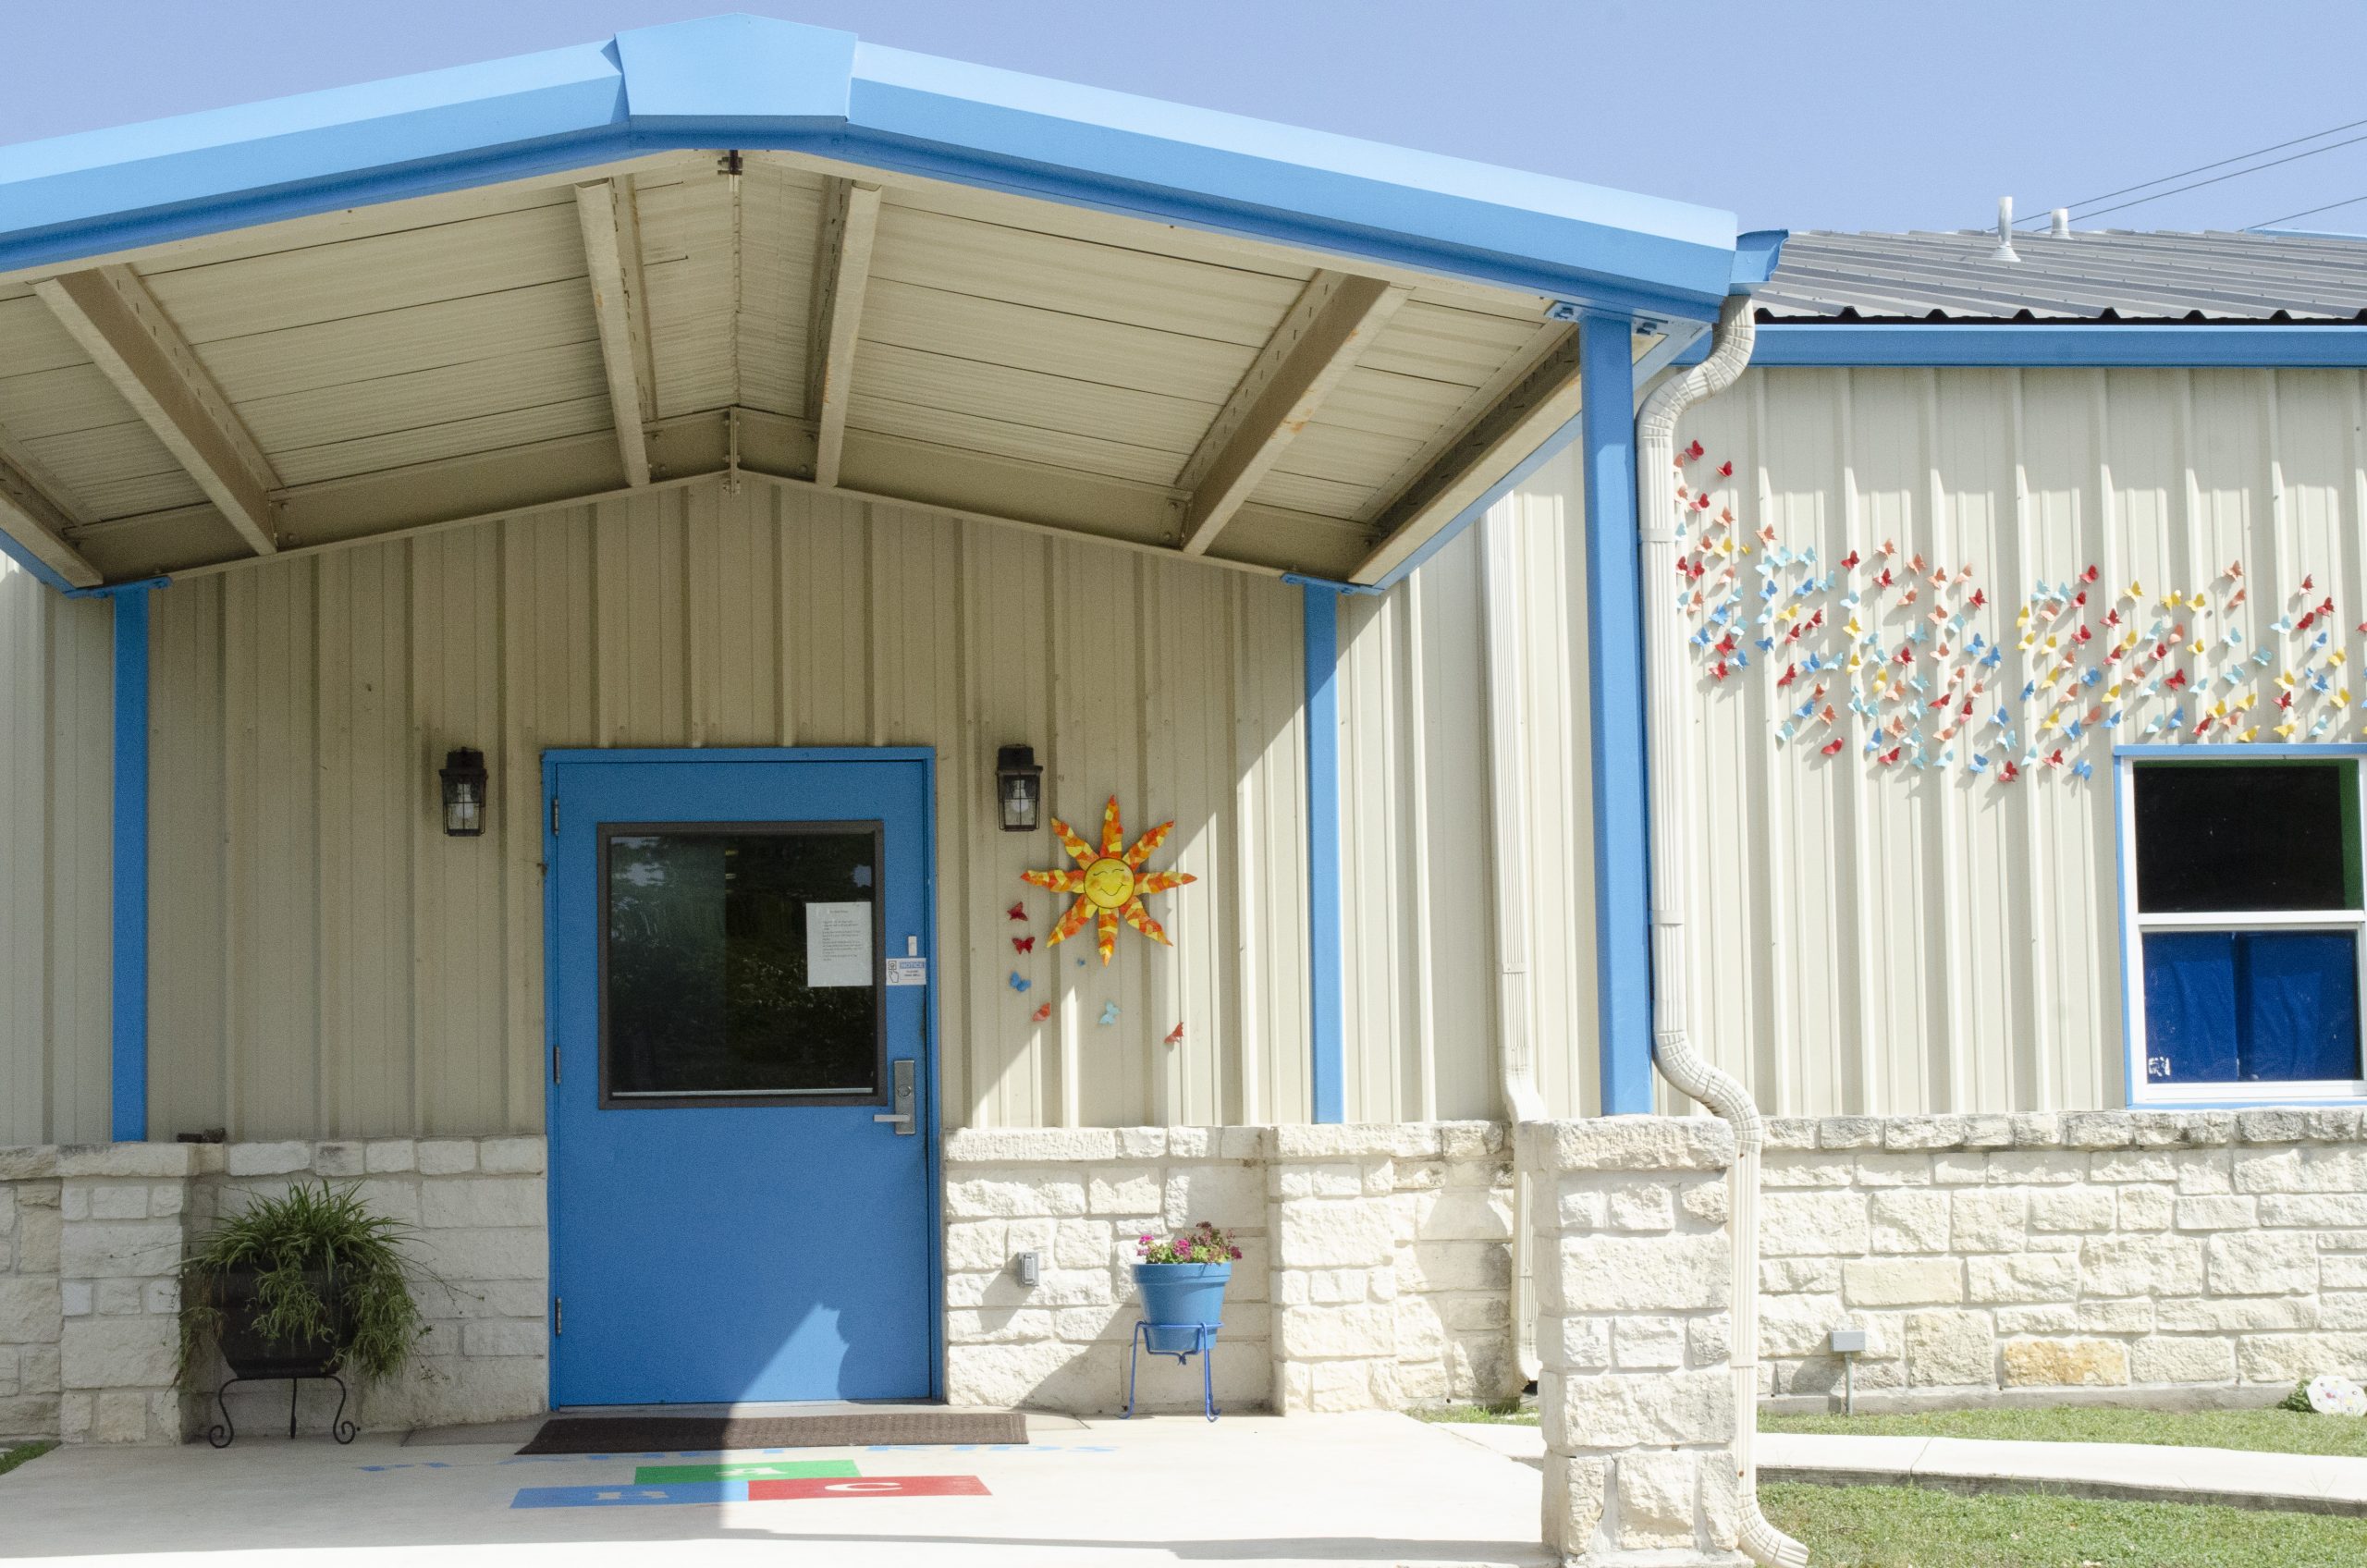 Boerne Texas Preschool and Day Care, Planet Kids Learning Center